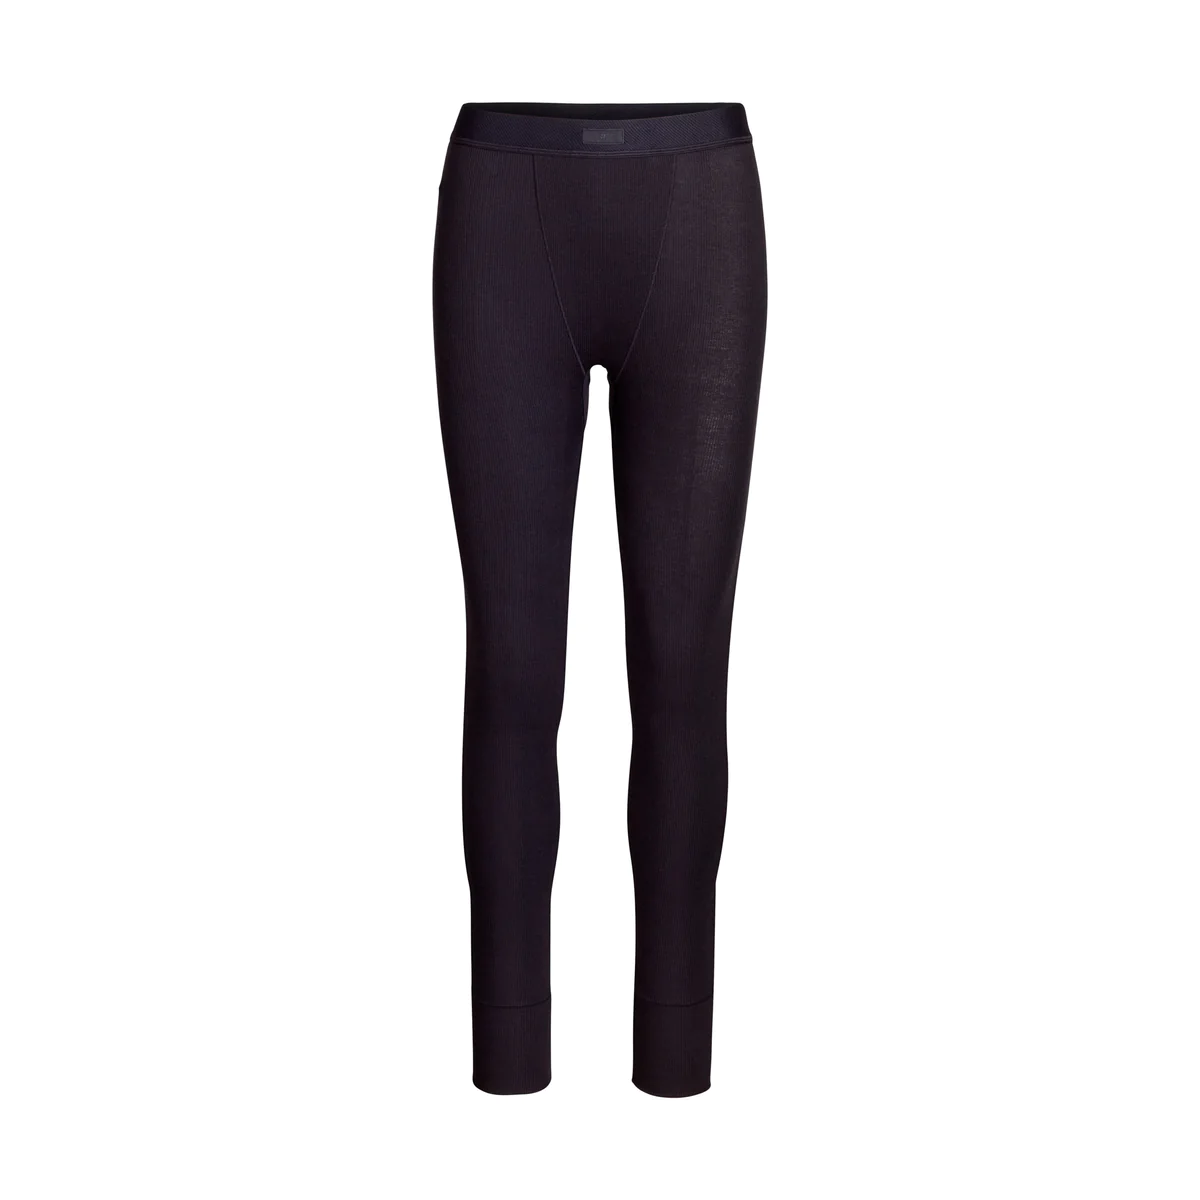 SSENSE Exclusive Gray Leggings by Sporty & Rich on Sale